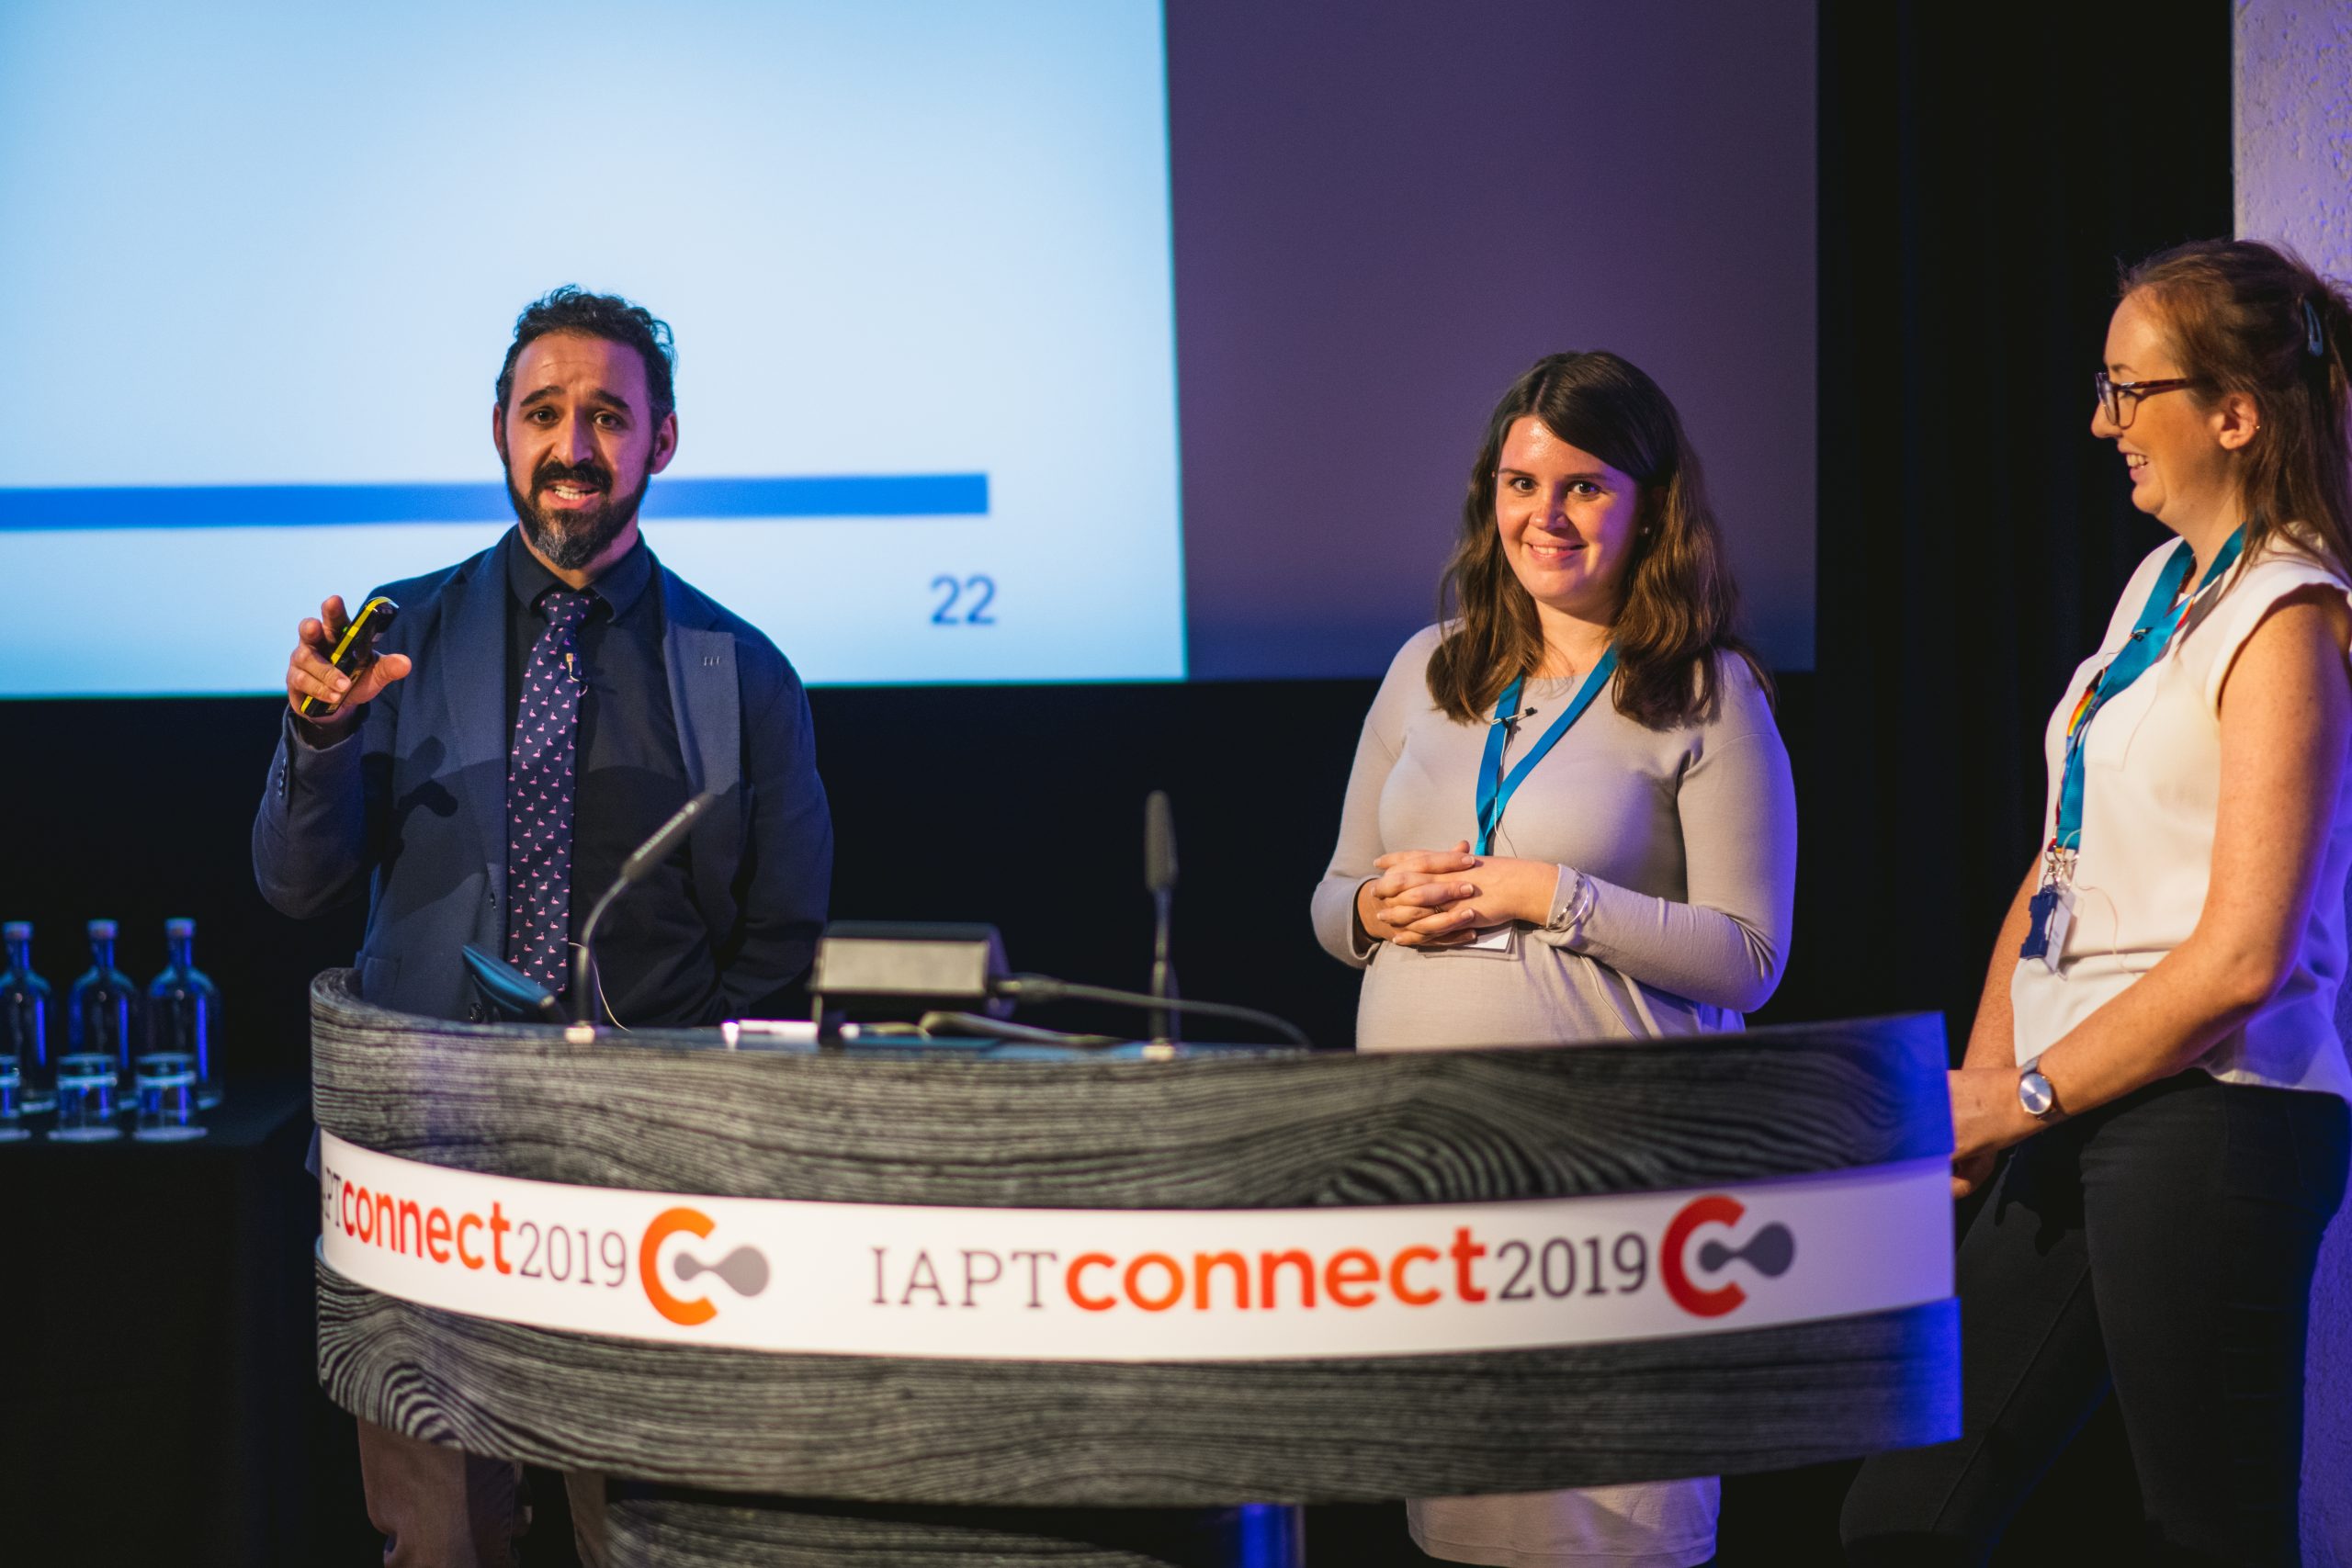 IAPT Connect 19